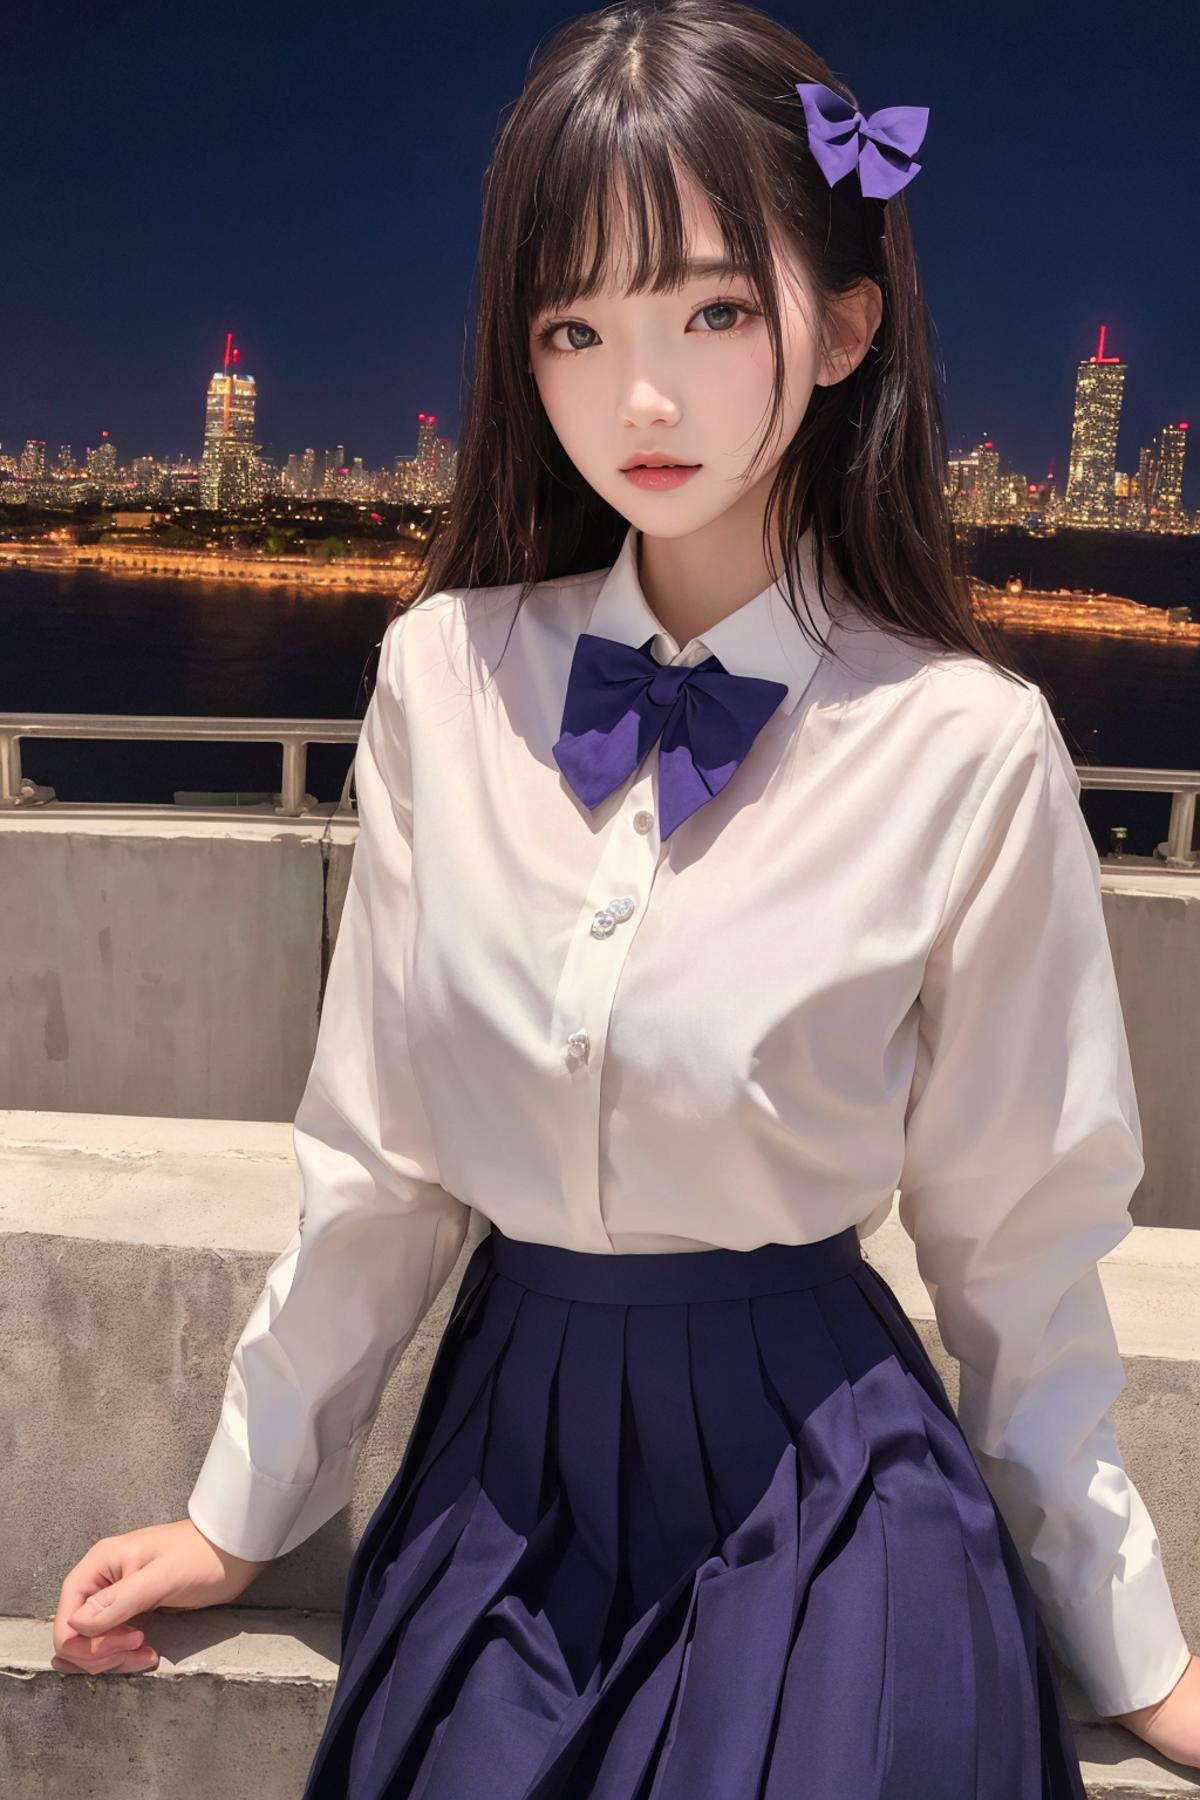 JK制服 image by diopineapple